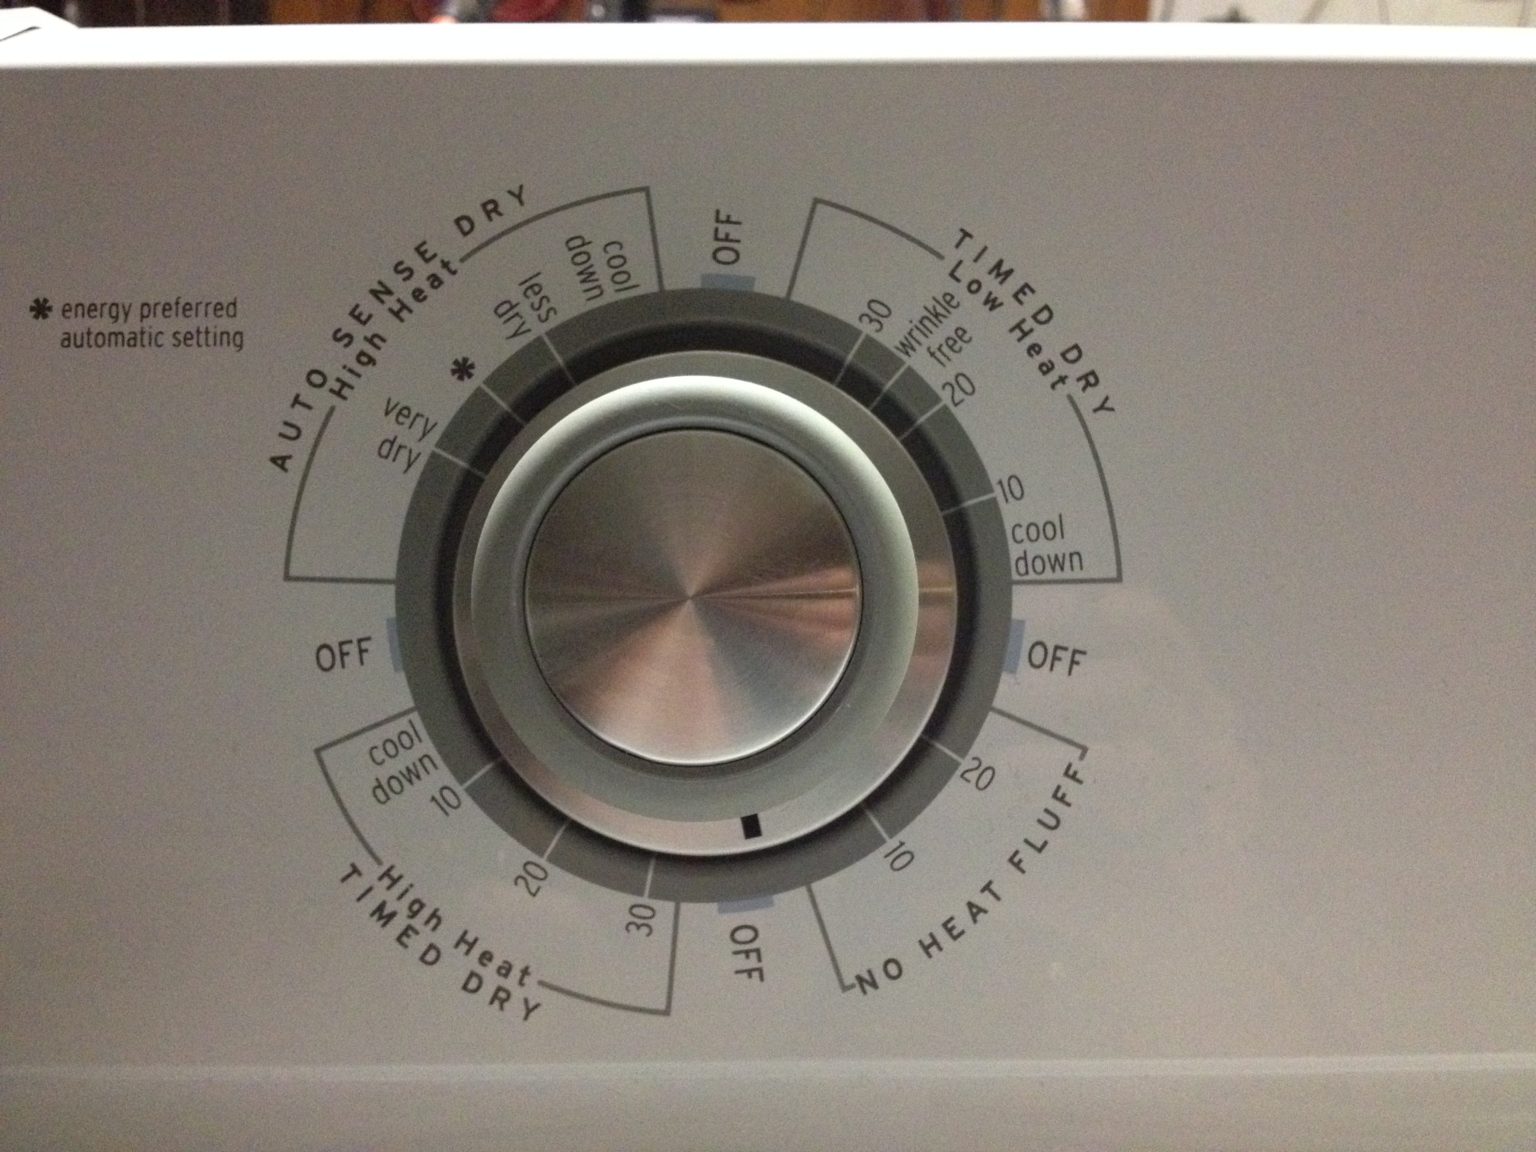 This dryer switch offers many options for timing the drying process